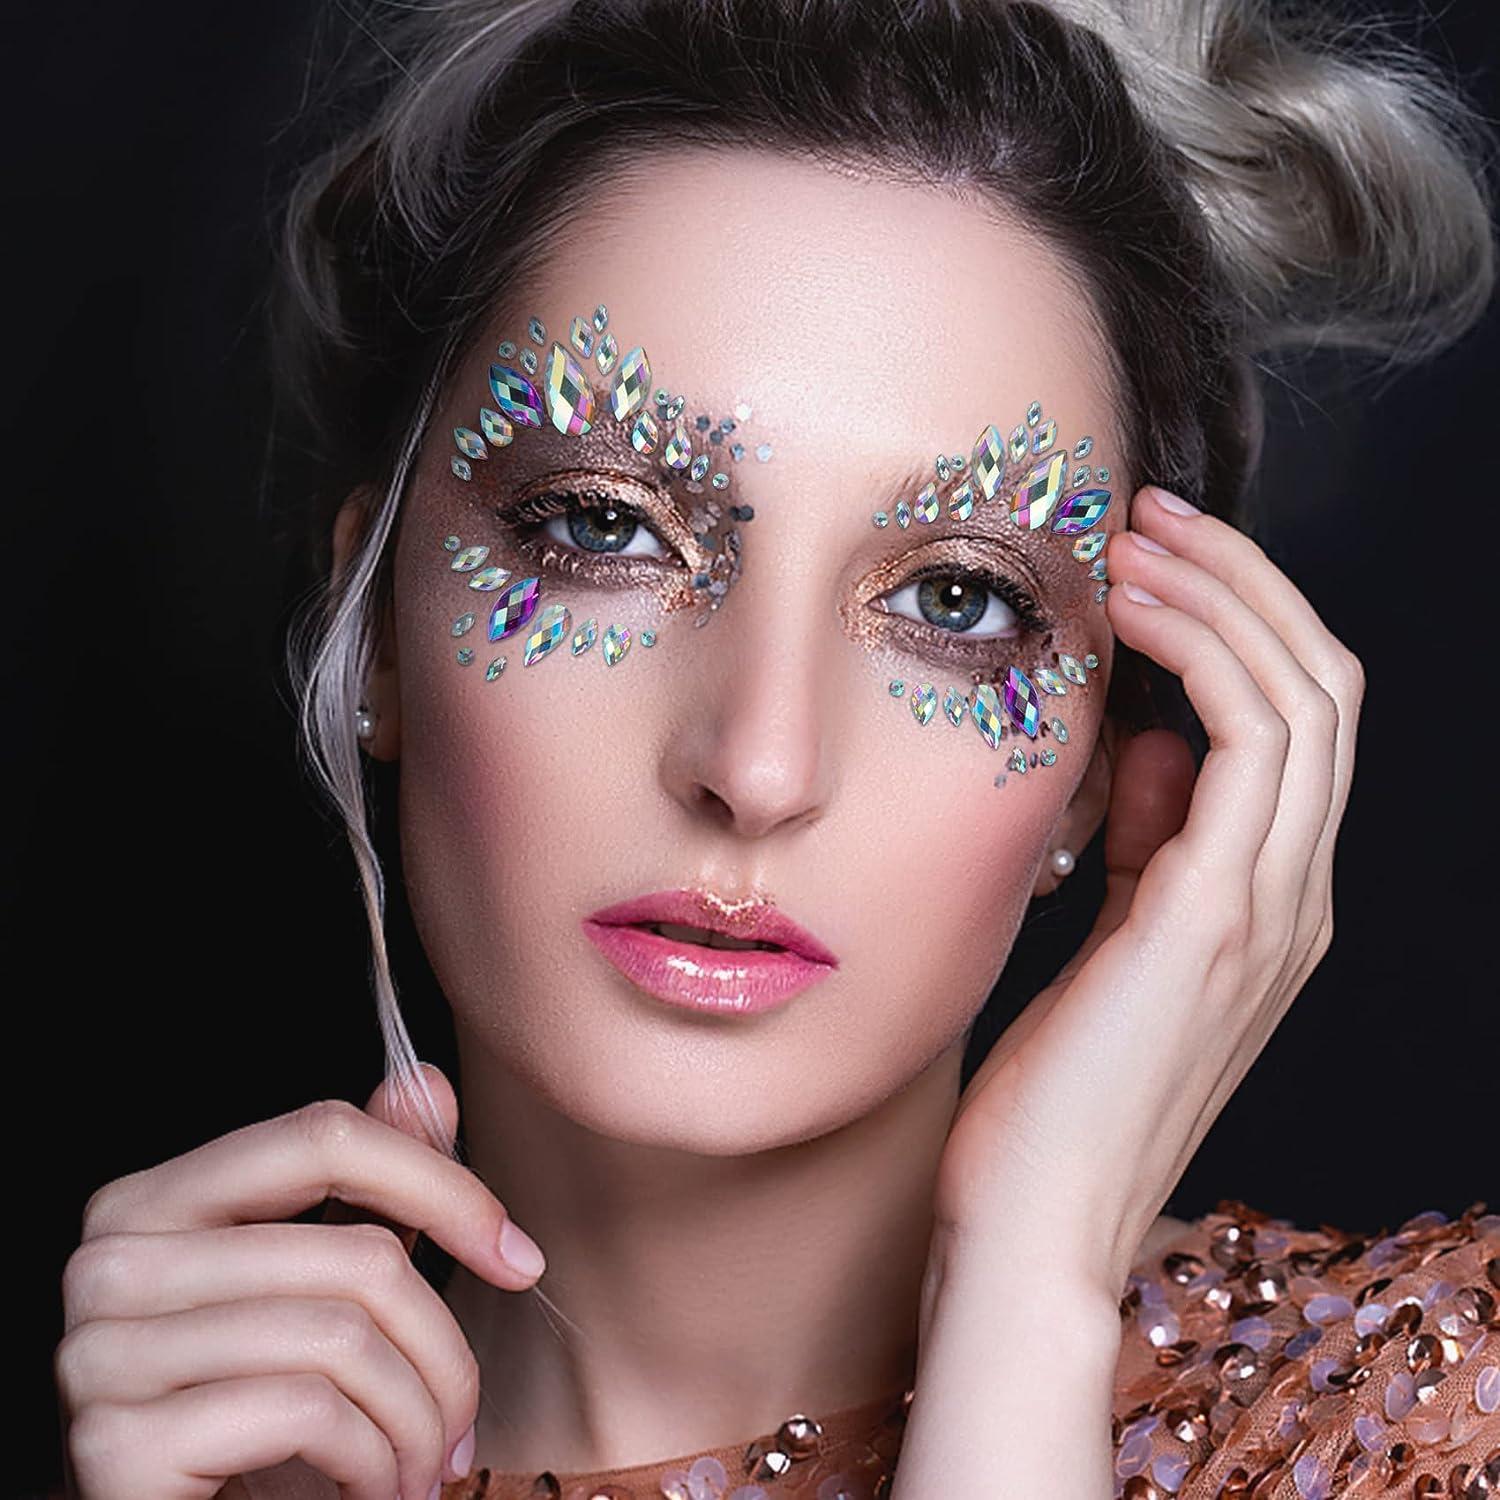  6 Sheets Face Jewels Face Gems Stick On, Self Adhesive  Rhinestones for Makeup Rave Accessories for Festival Holiday Costumes :  Beauty & Personal Care